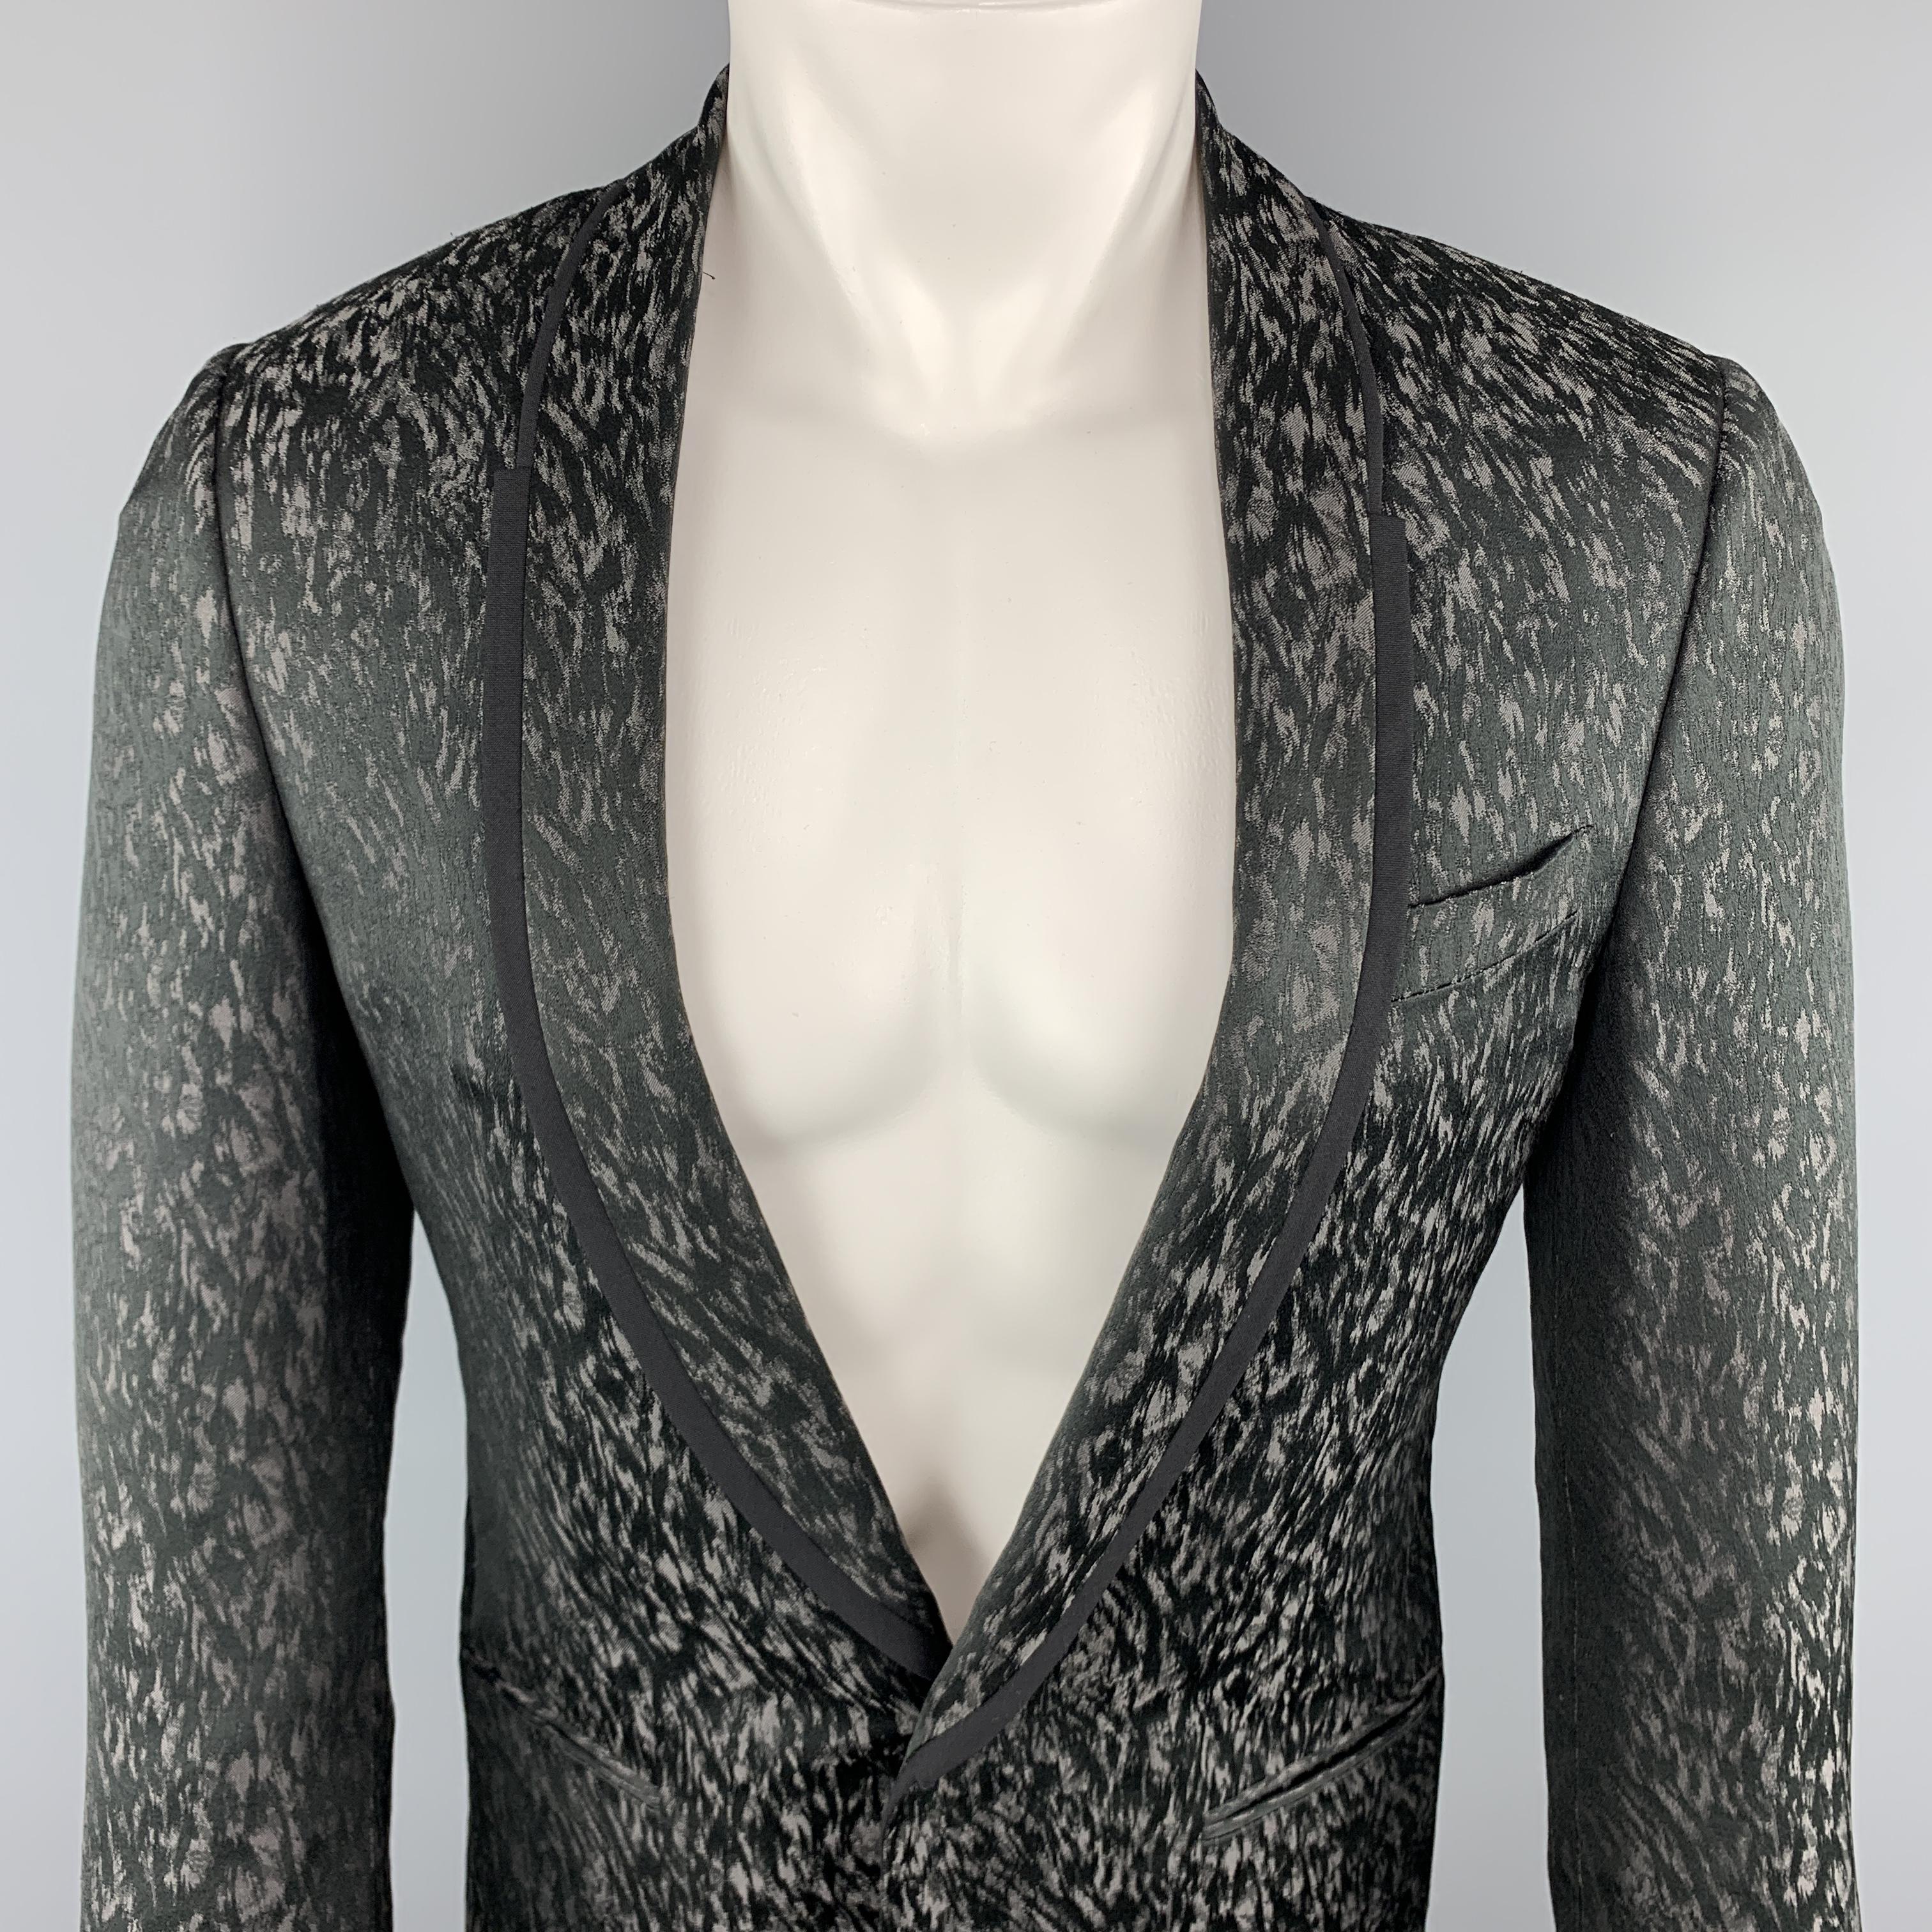 LANVIN Sport Coat comes in black and grey tones in a woven animal print cotton blend material, with a shawl collar, a black trim, slit pockets, a single button at closure, single breasted, buttoned cuffs and a single vent at back. Made in